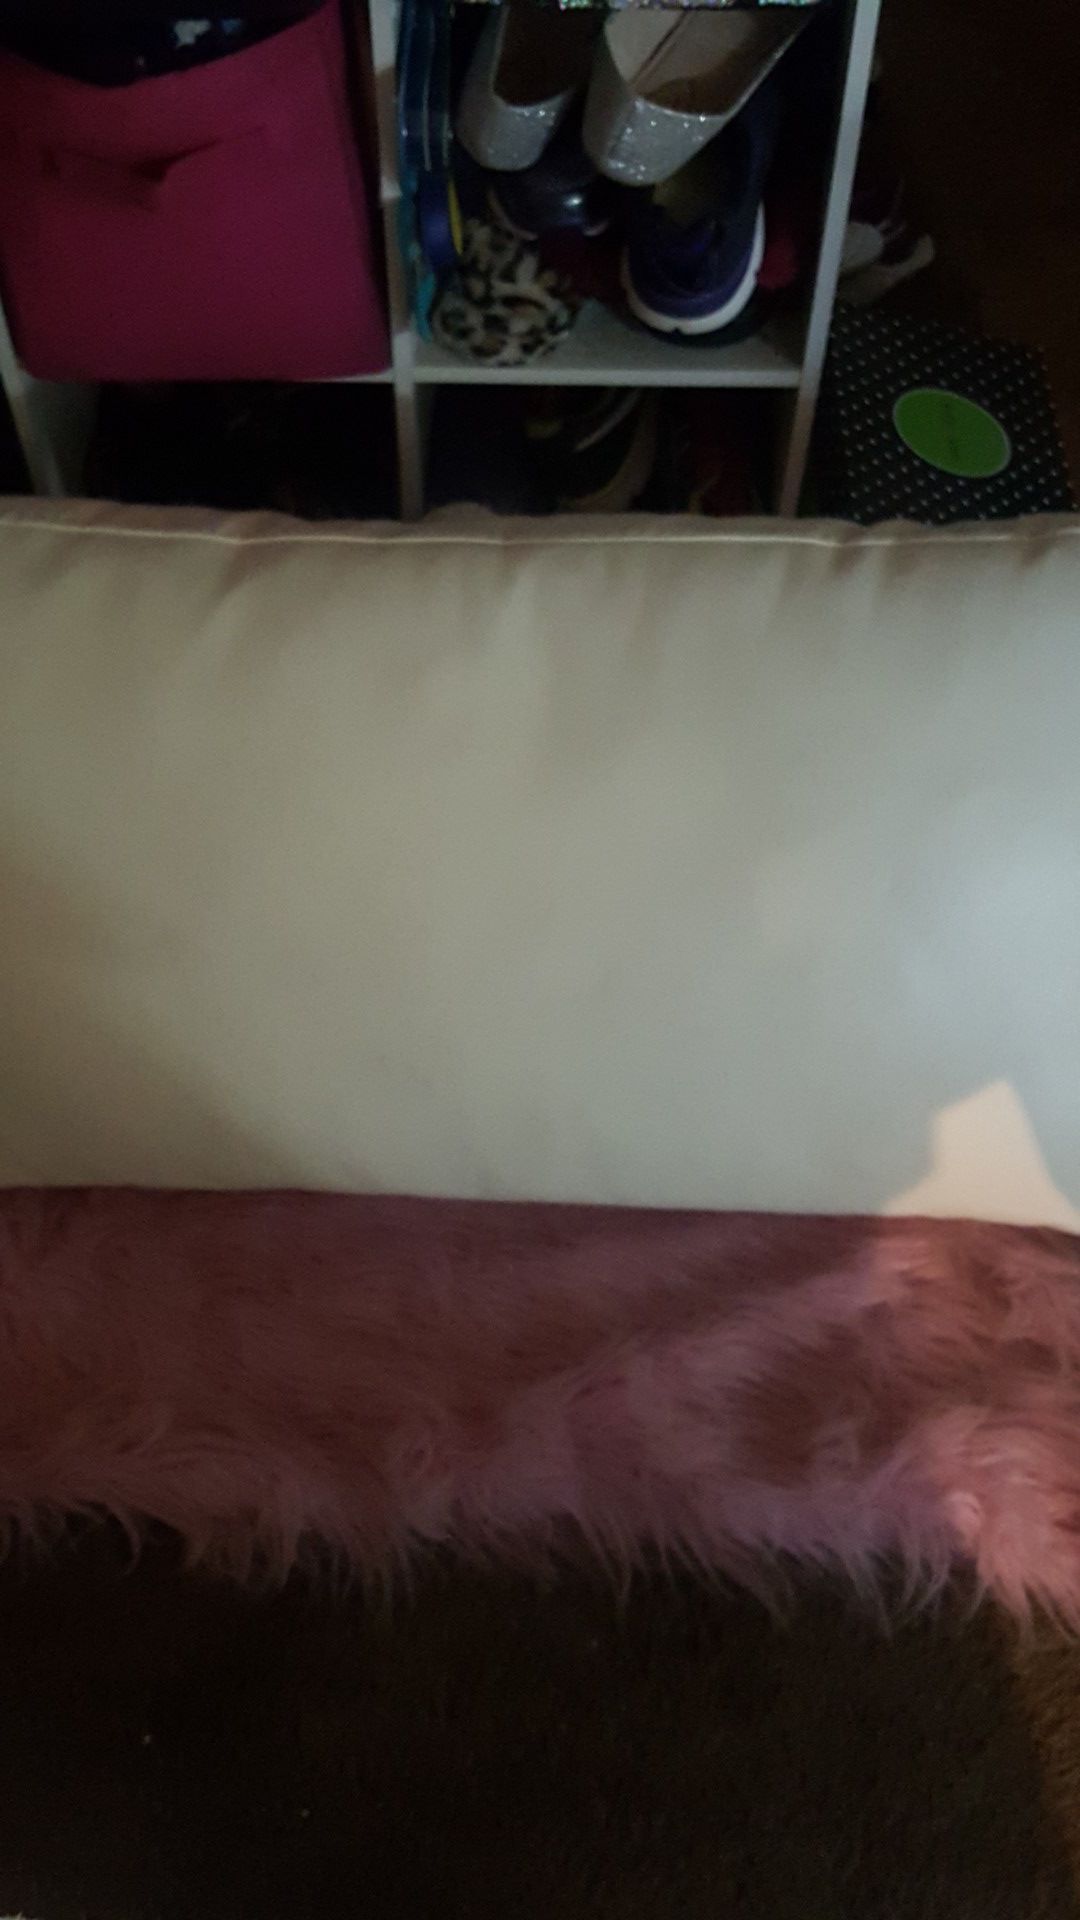 DONATED GONE TOMORROW SALVATION ARMY TRUCK COMING LAST DAY YOU TELL ME PRICE OR ITS DONATED 2 LARGE GENUINE LEATHER PILLOWS 40 this weekend only